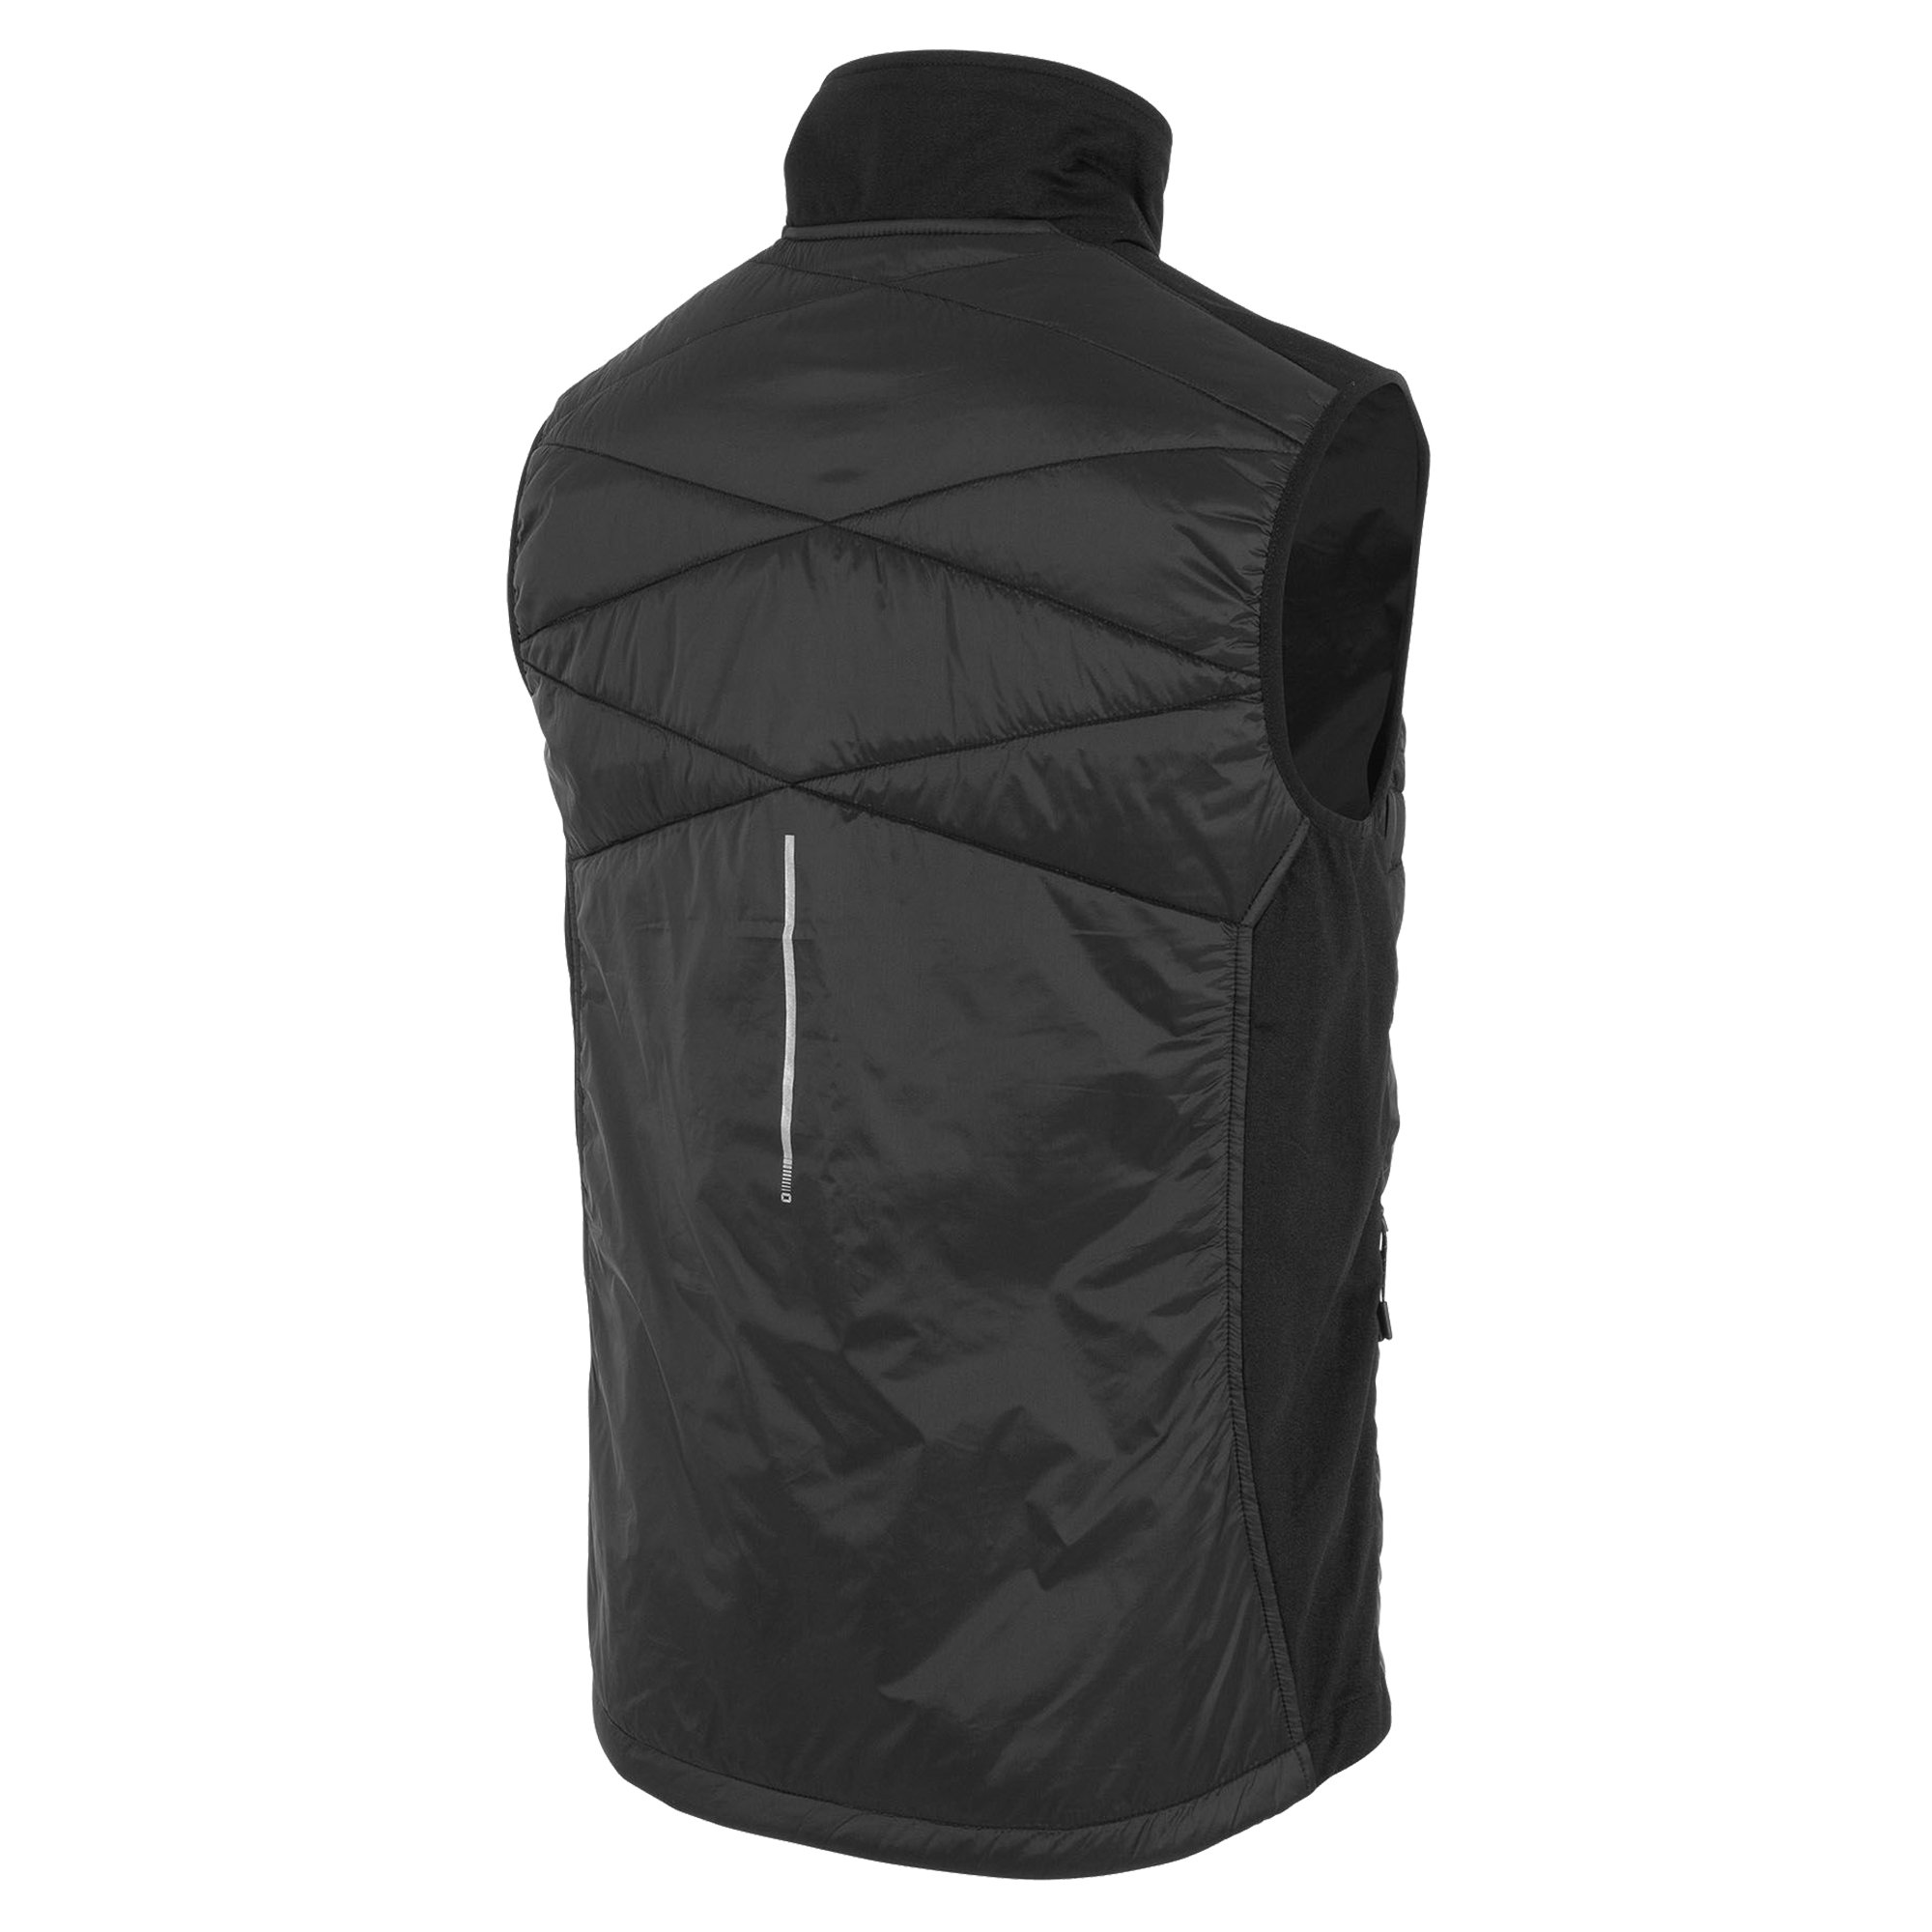 Stanno Functionals Thermal Vest